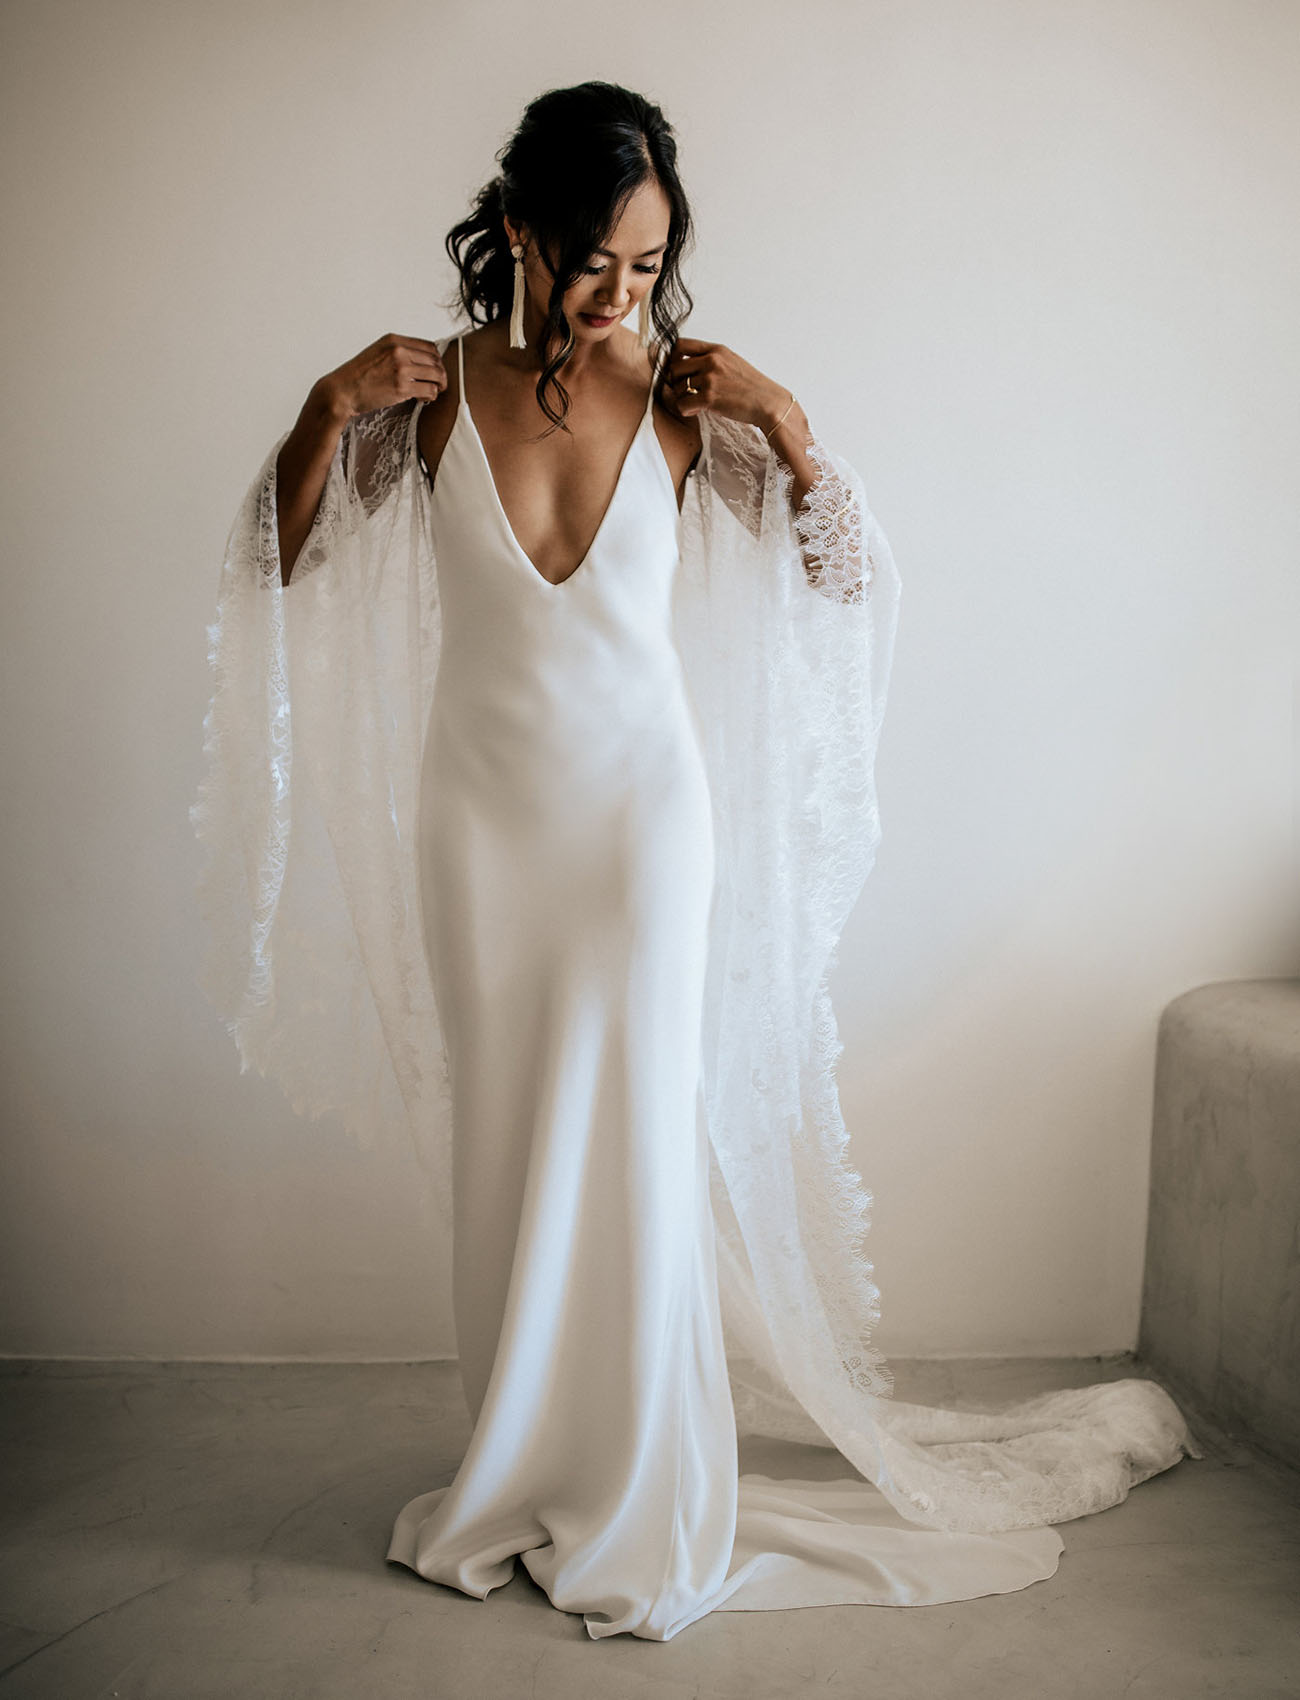 The bride was wearing a plain spaghetti strap wedding dress with a plunging neckline and an ethereal coverup